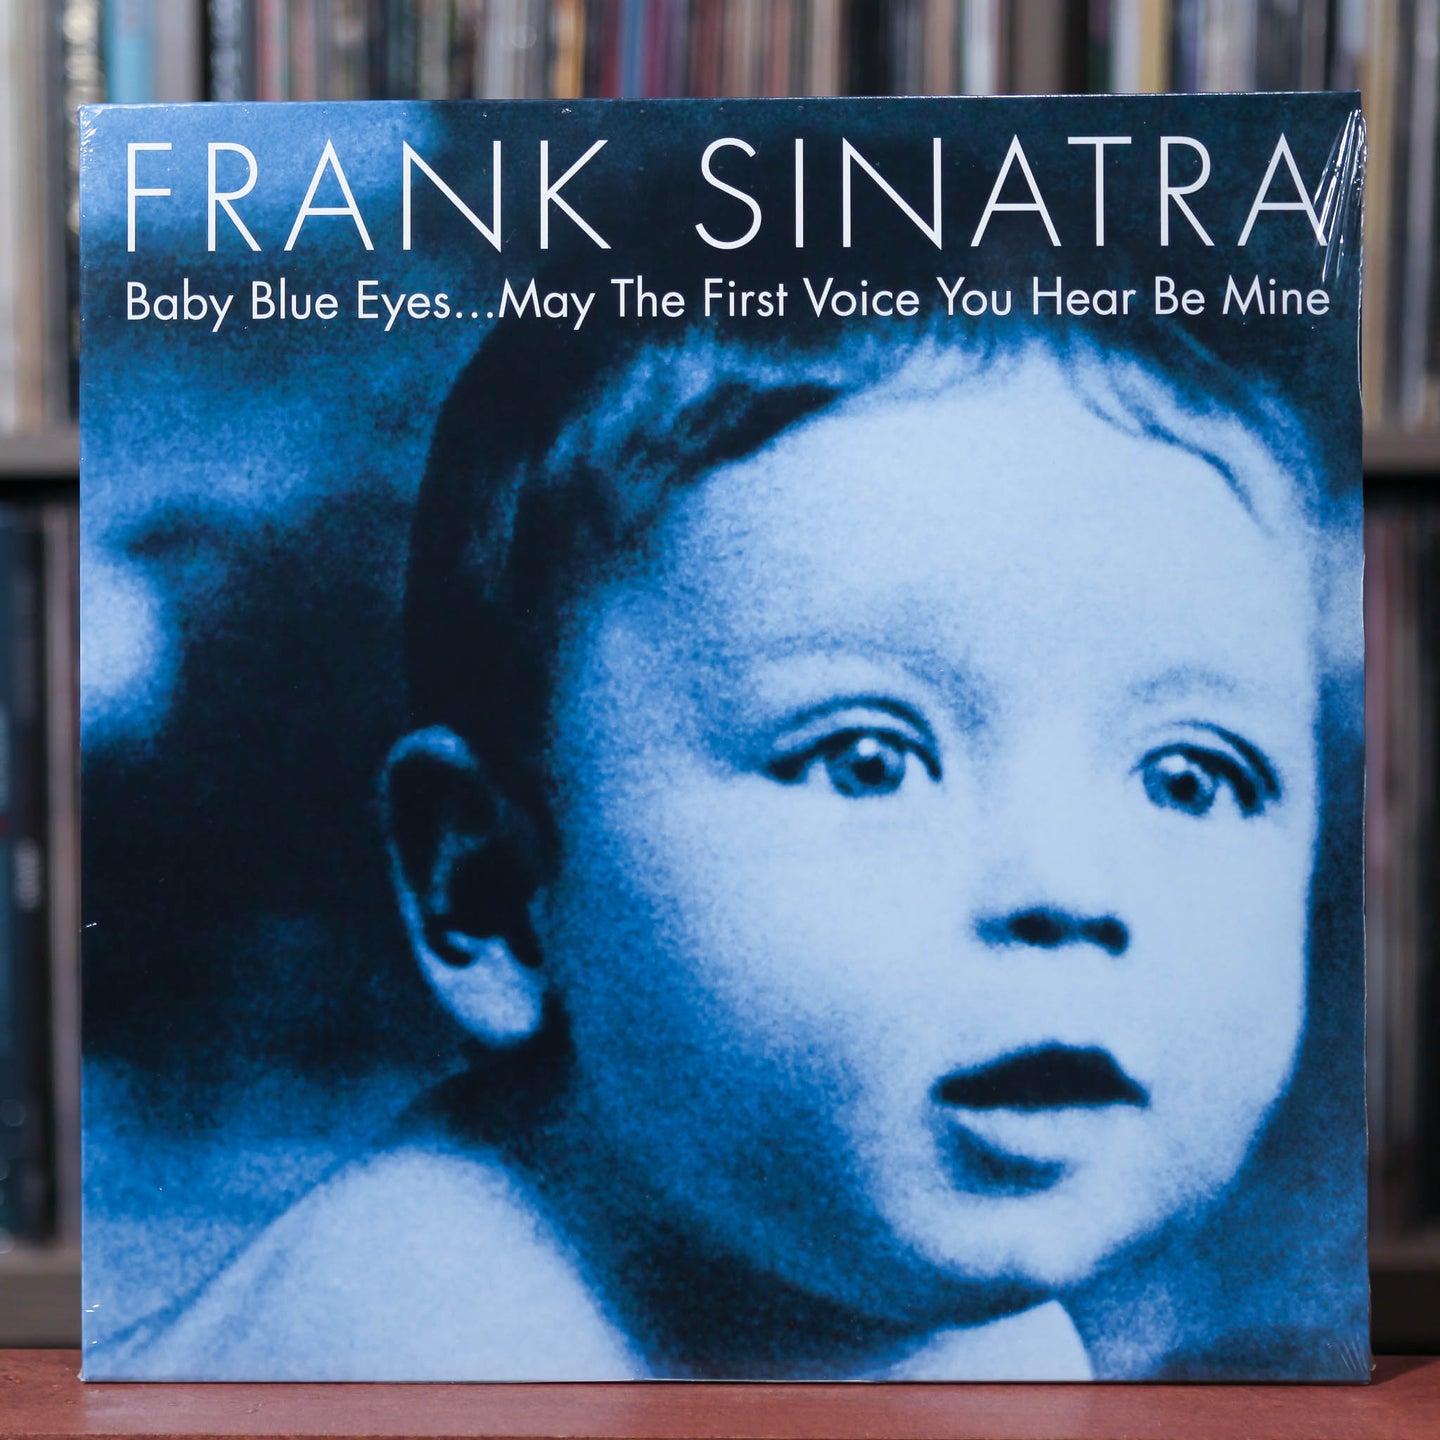 Frank Sinatra - Baby Blue Eyes...May The First Voice You Hear Be Mine - 2LP - 2018 Capitol, SEALED